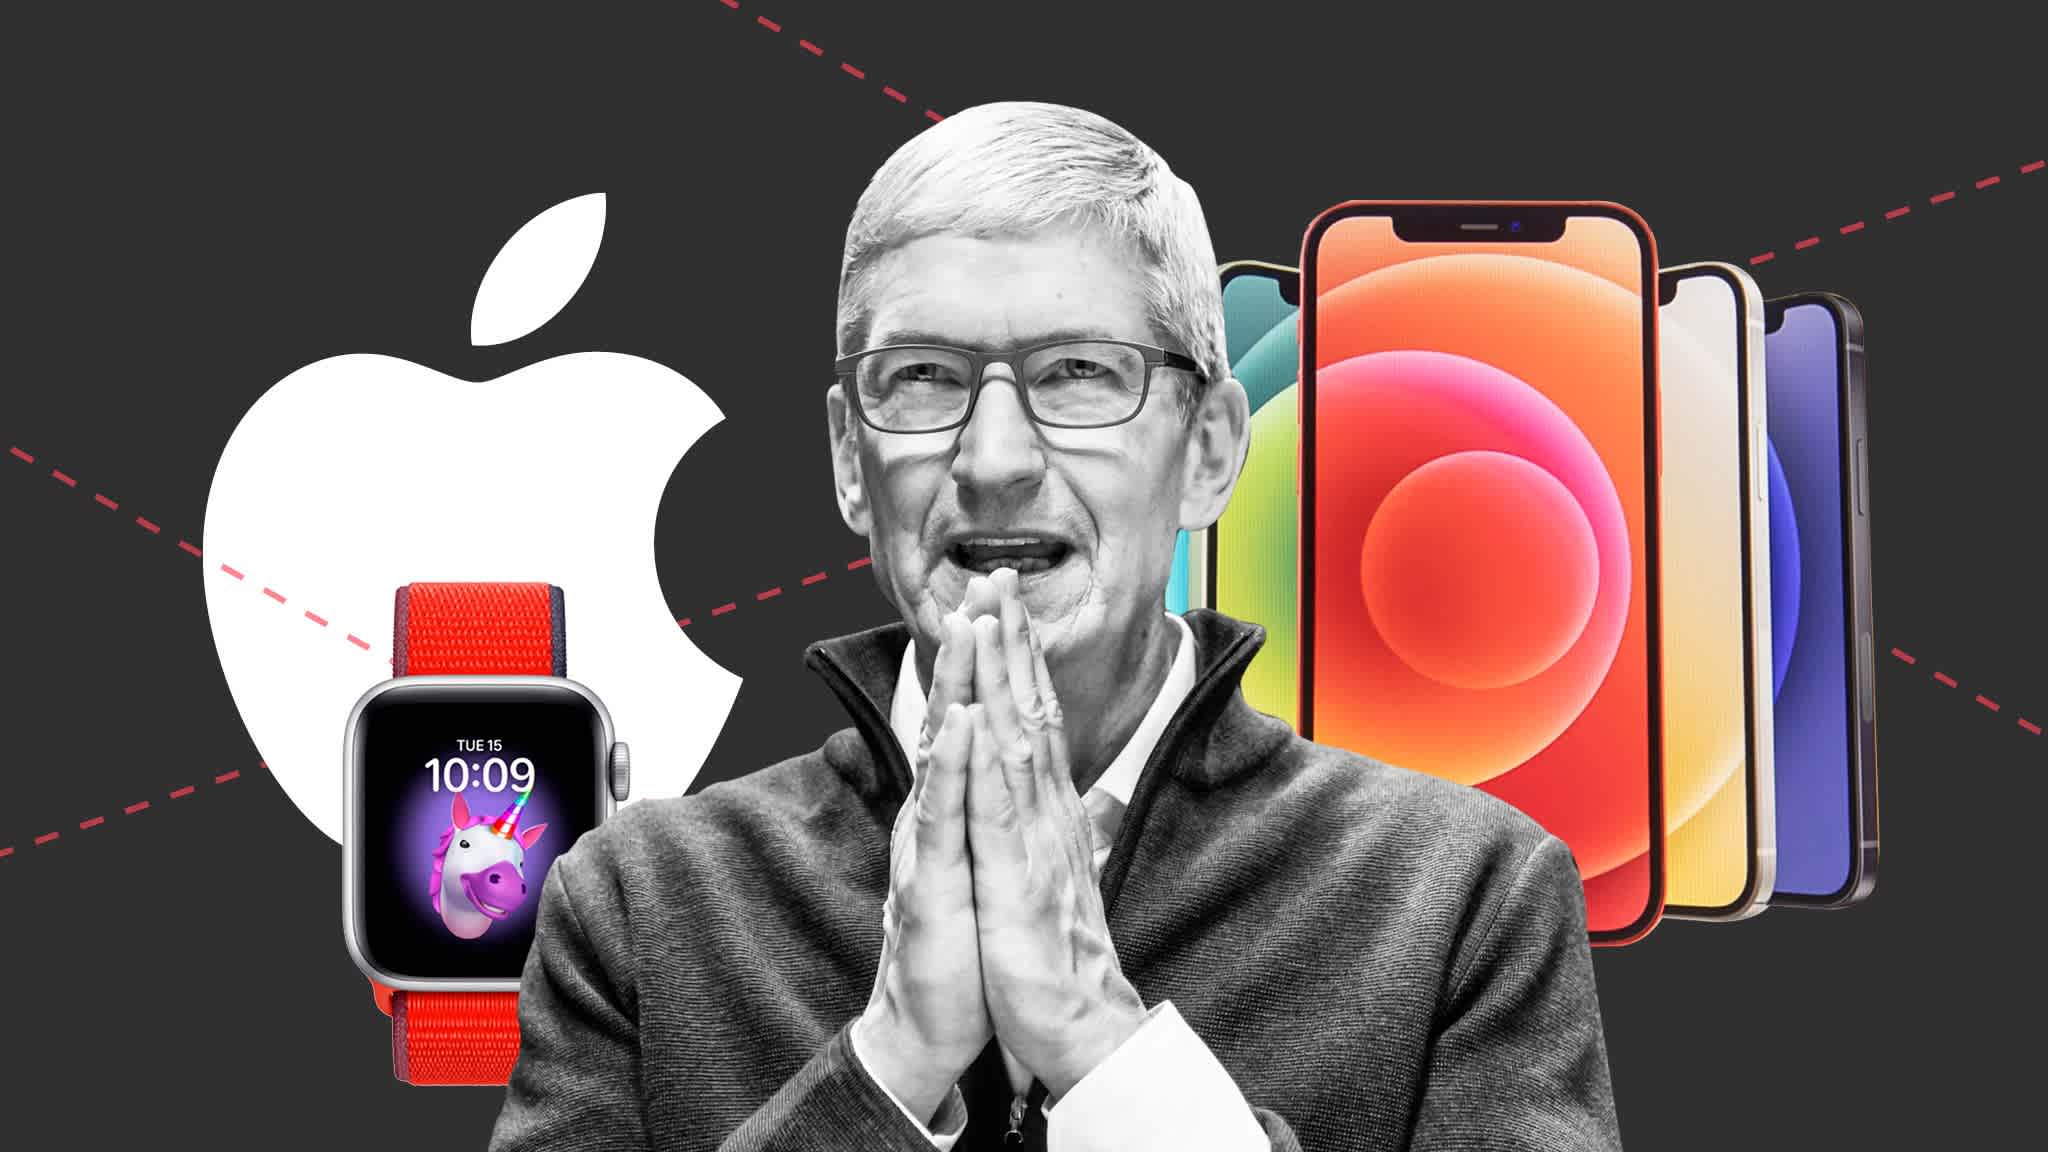 Supply chain crisis the only drag on Apple’s enormous growth